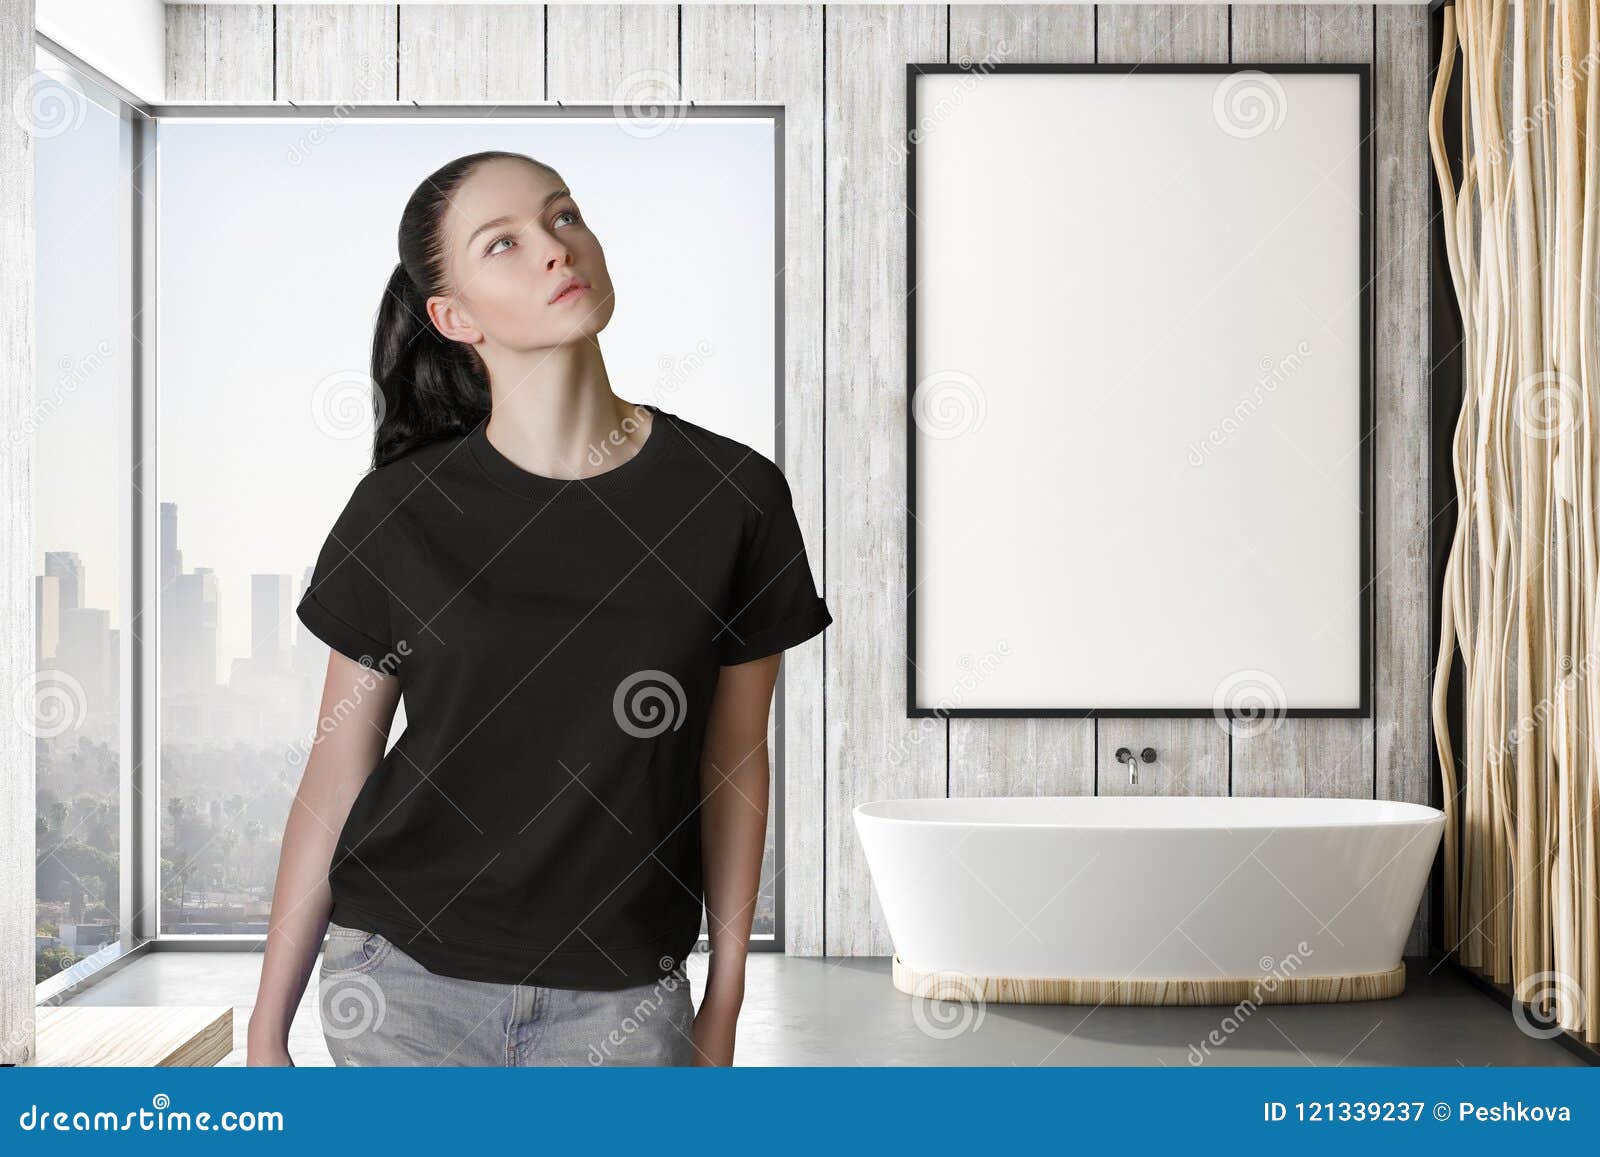 Download 12 499 Bathroom Mockup Photos Free Royalty Free Stock Photos From Dreamstime